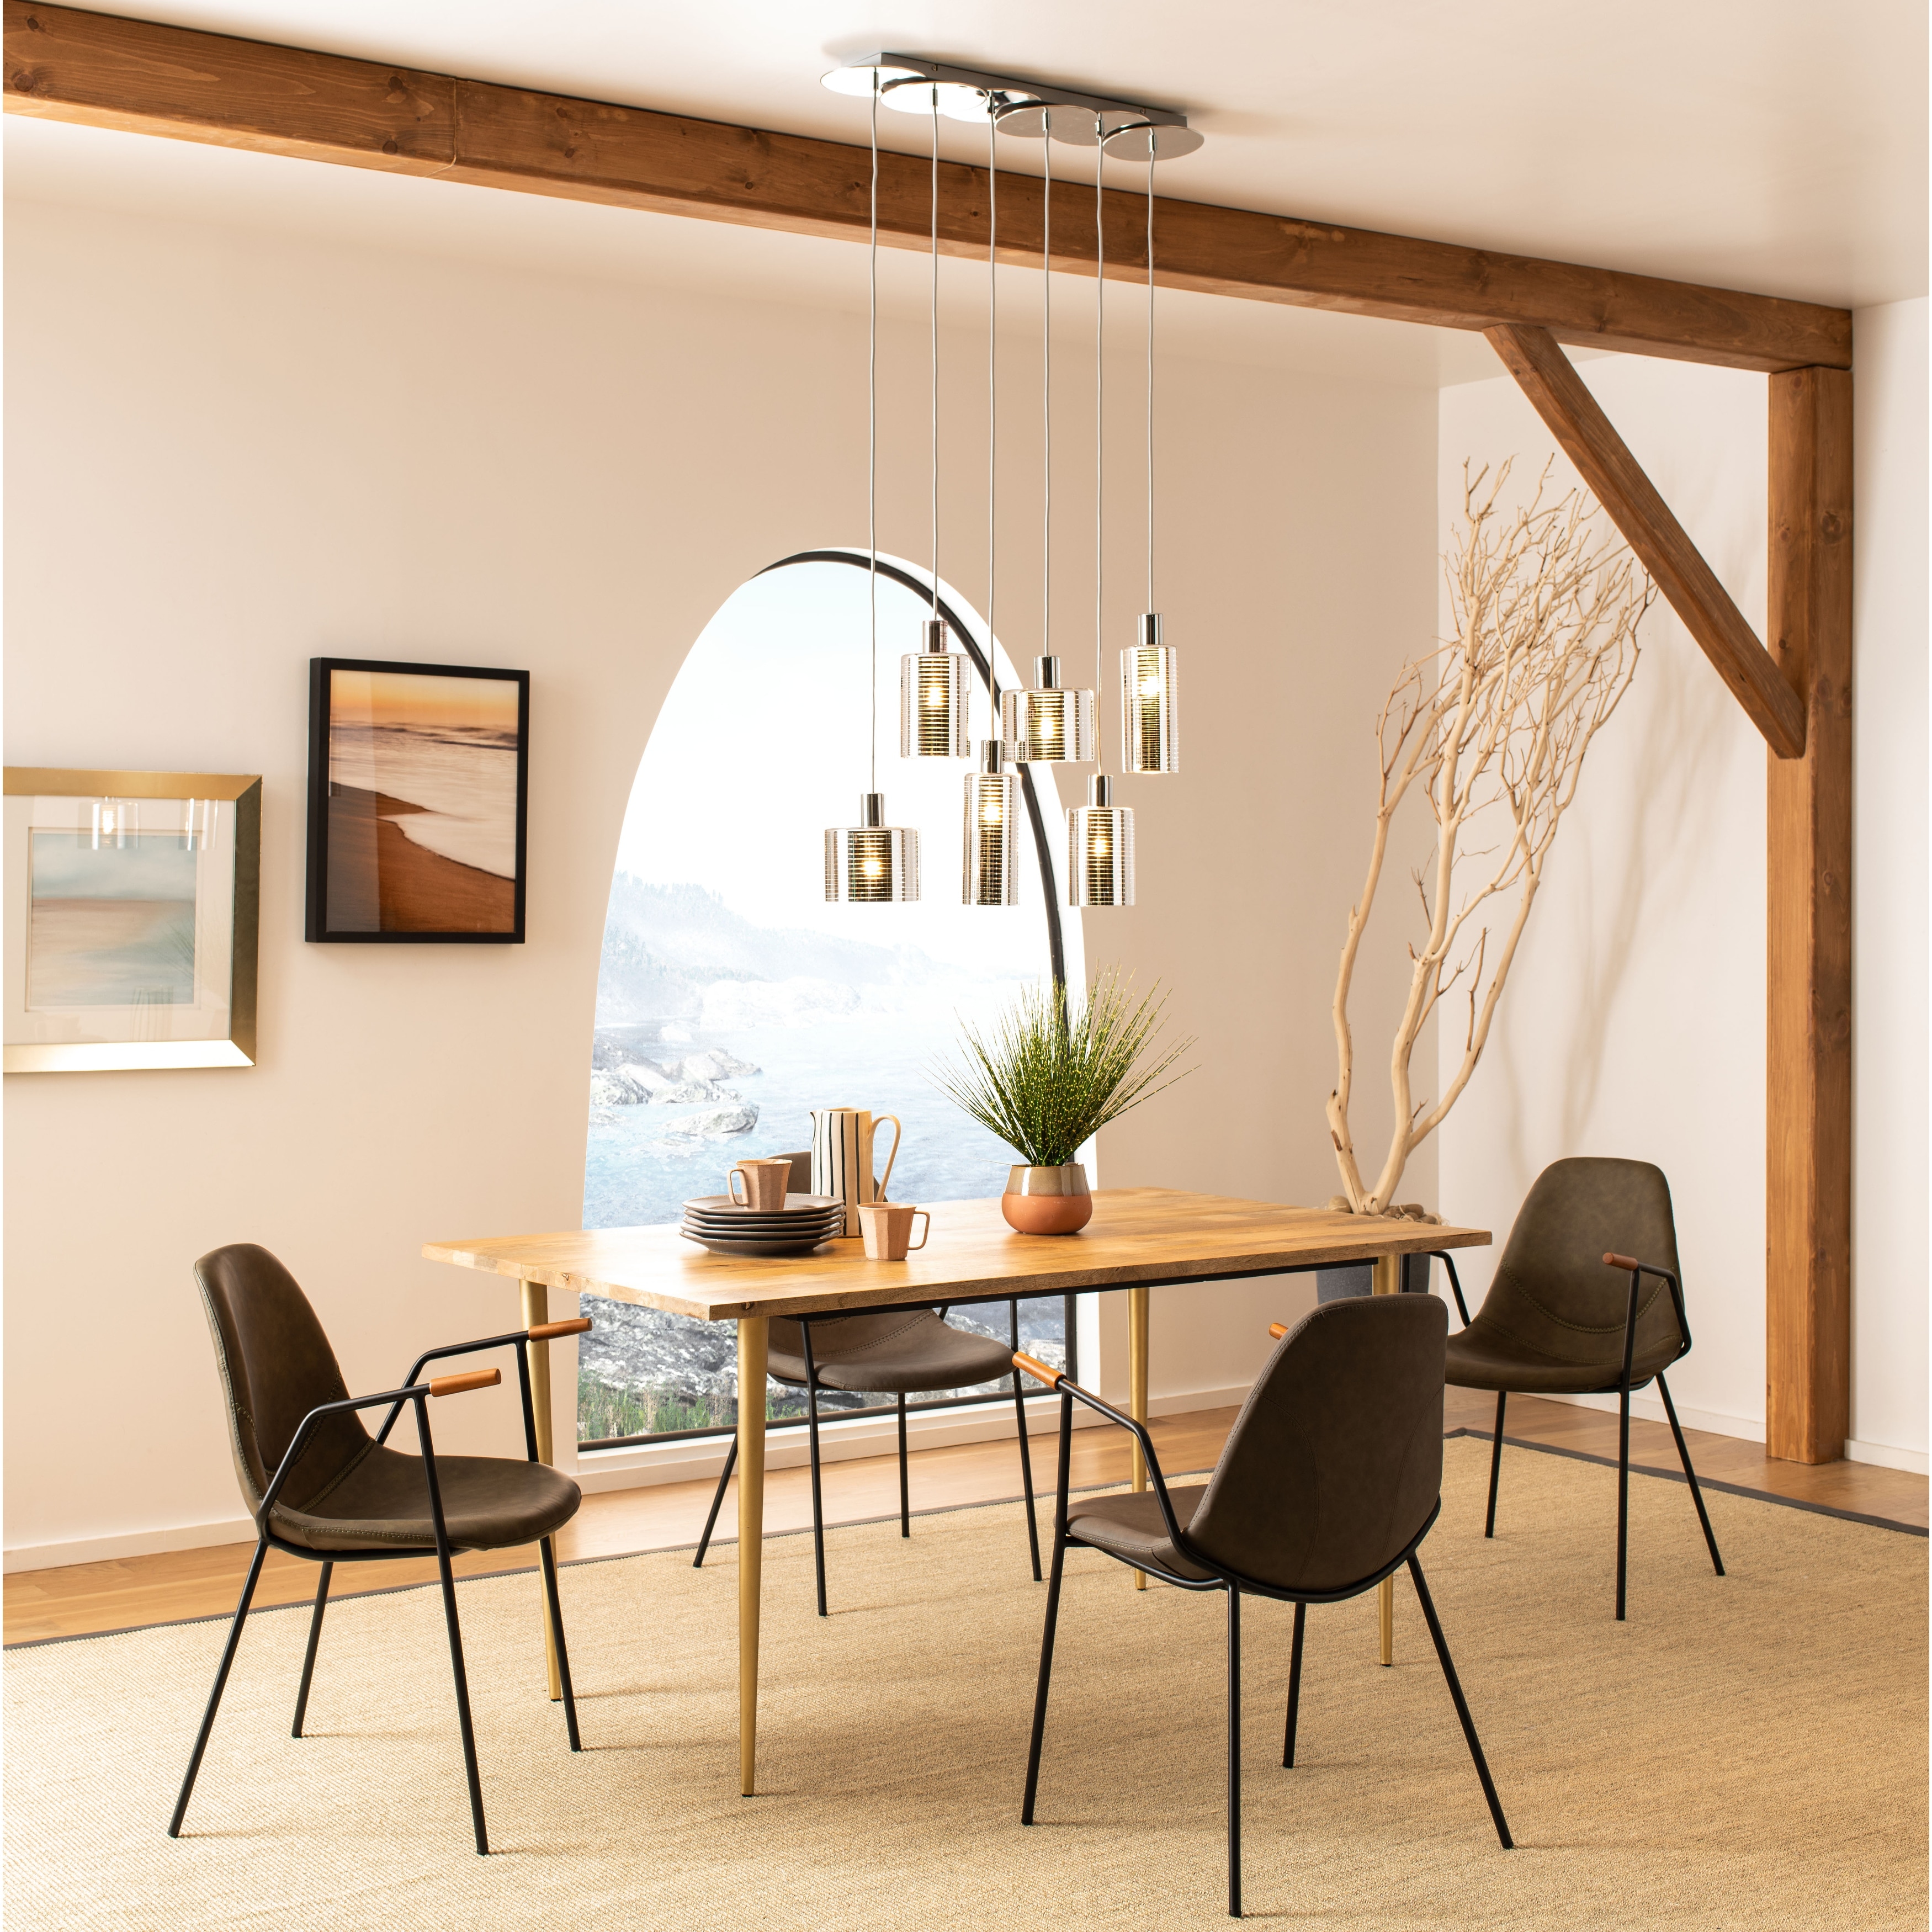 25 to 36 Inches, Chrome Pendant Lights - Bed Bath & Beyond